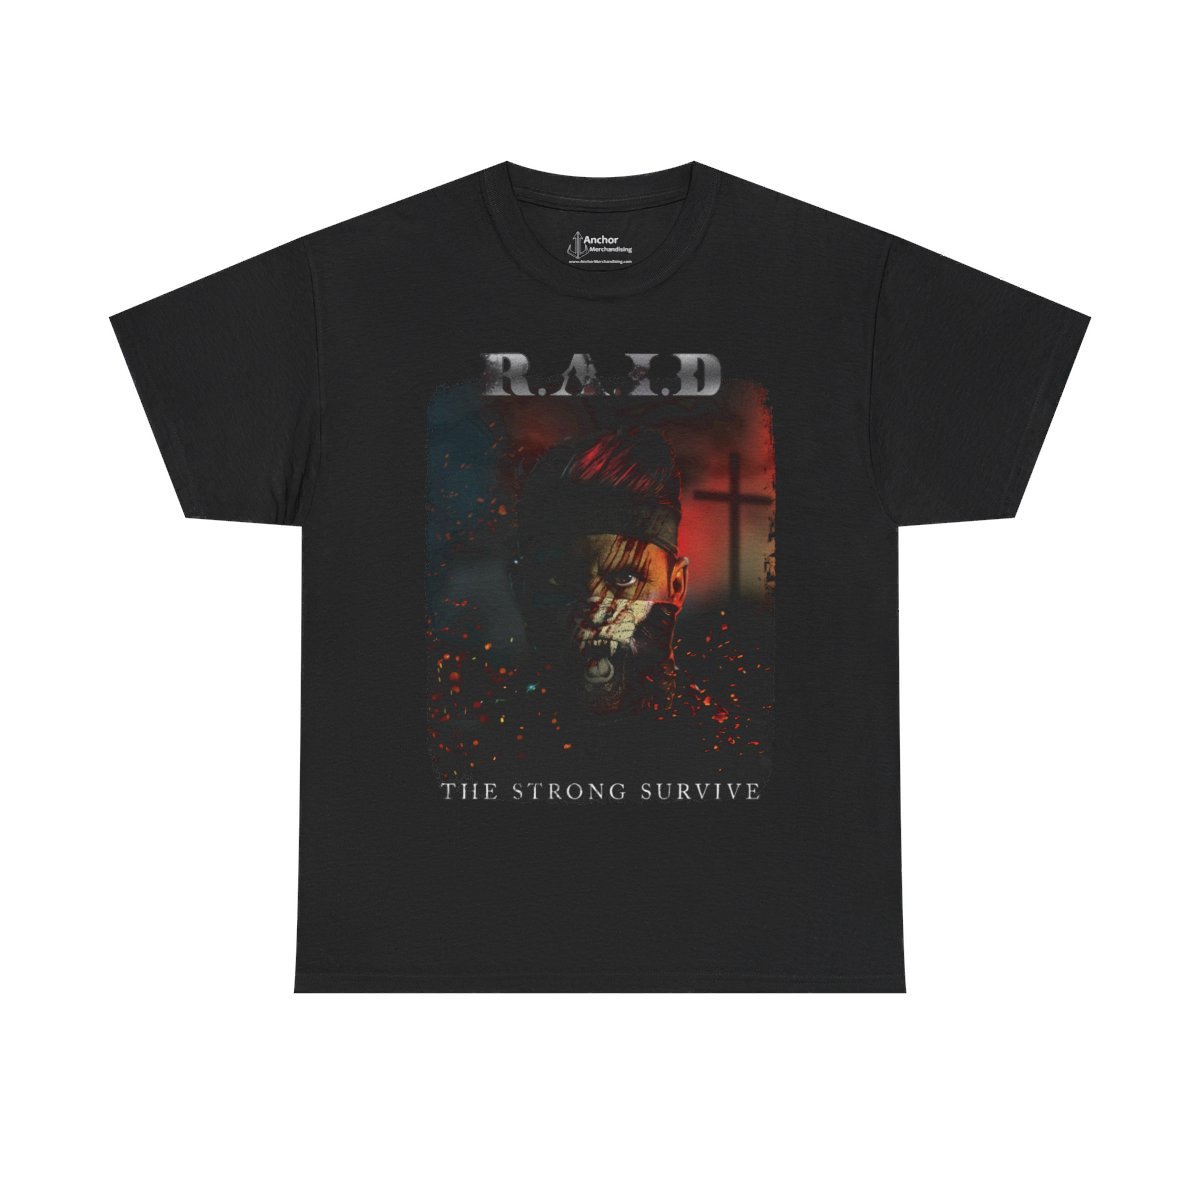 R.A.I.D – The Strong Survive Short Sleeve Tshirt